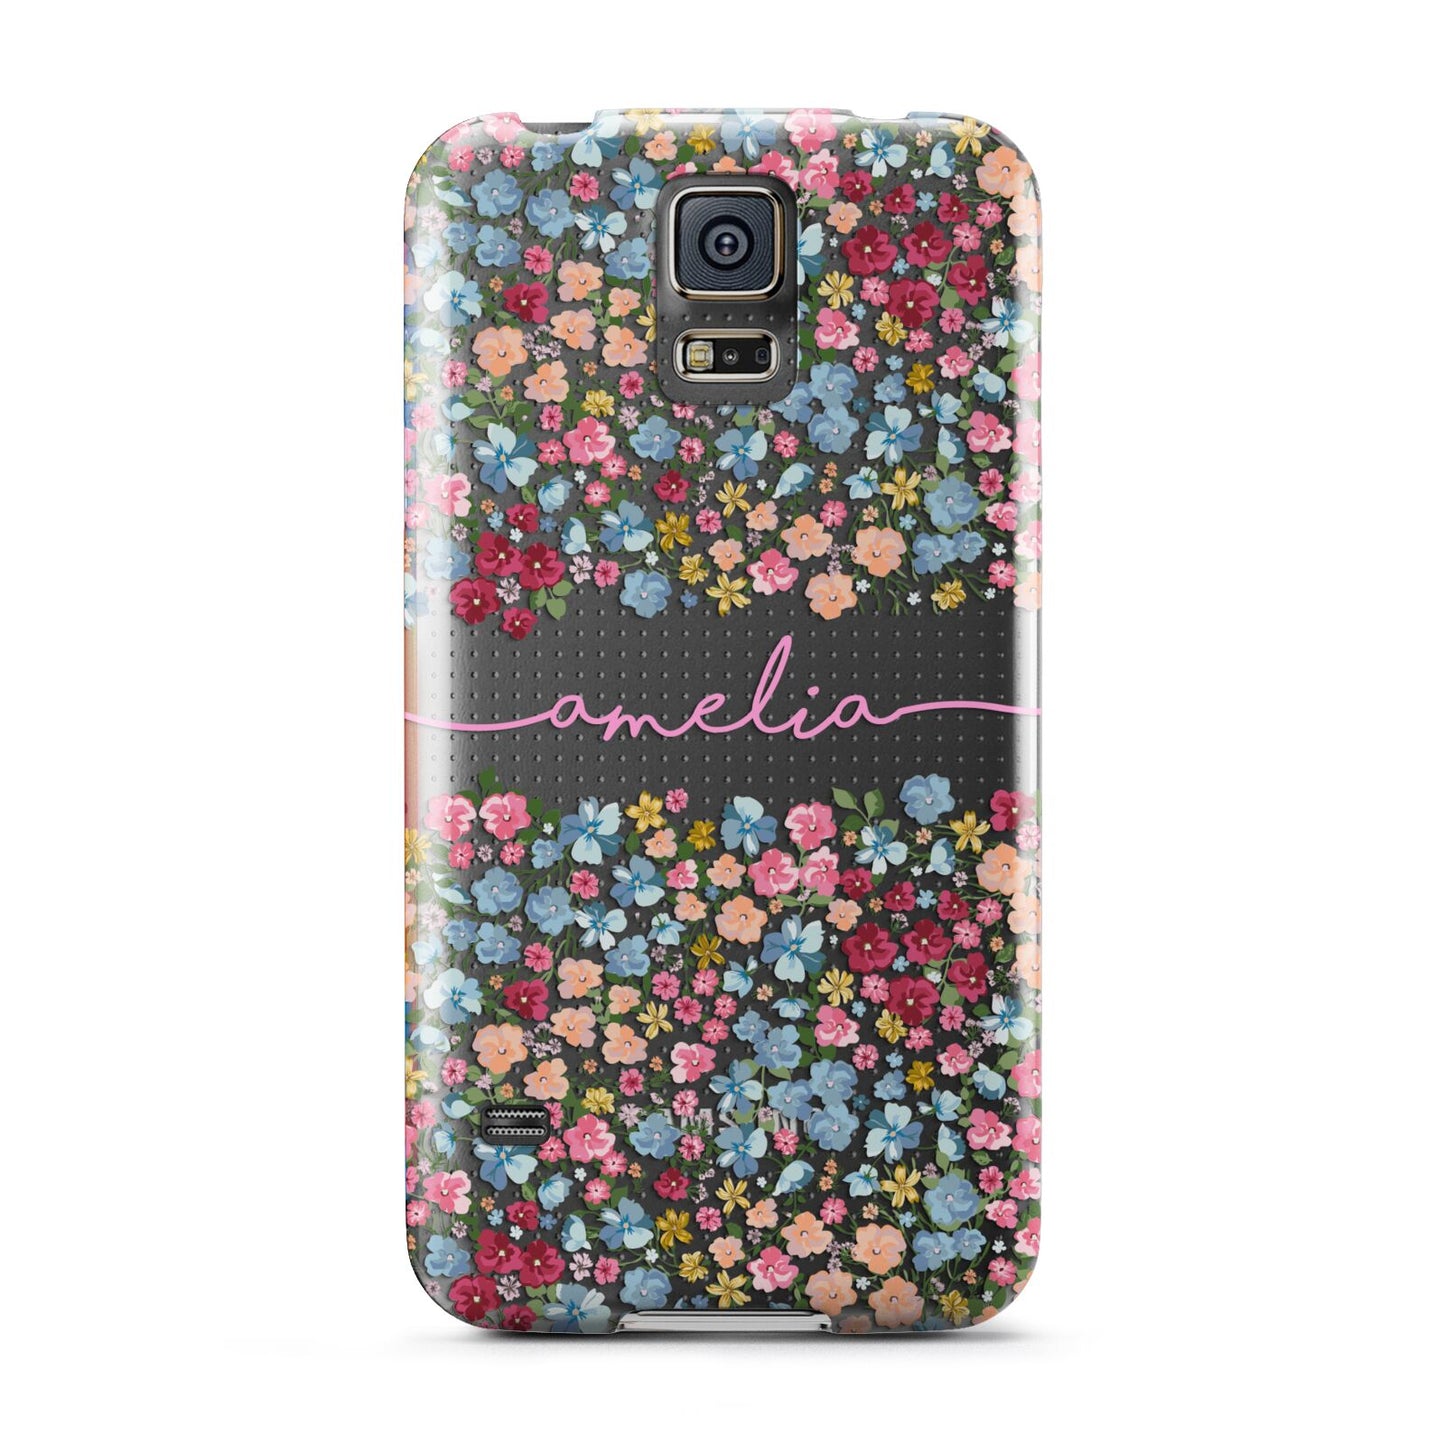 Personalised Floral Meadow Samsung Galaxy S5 Case